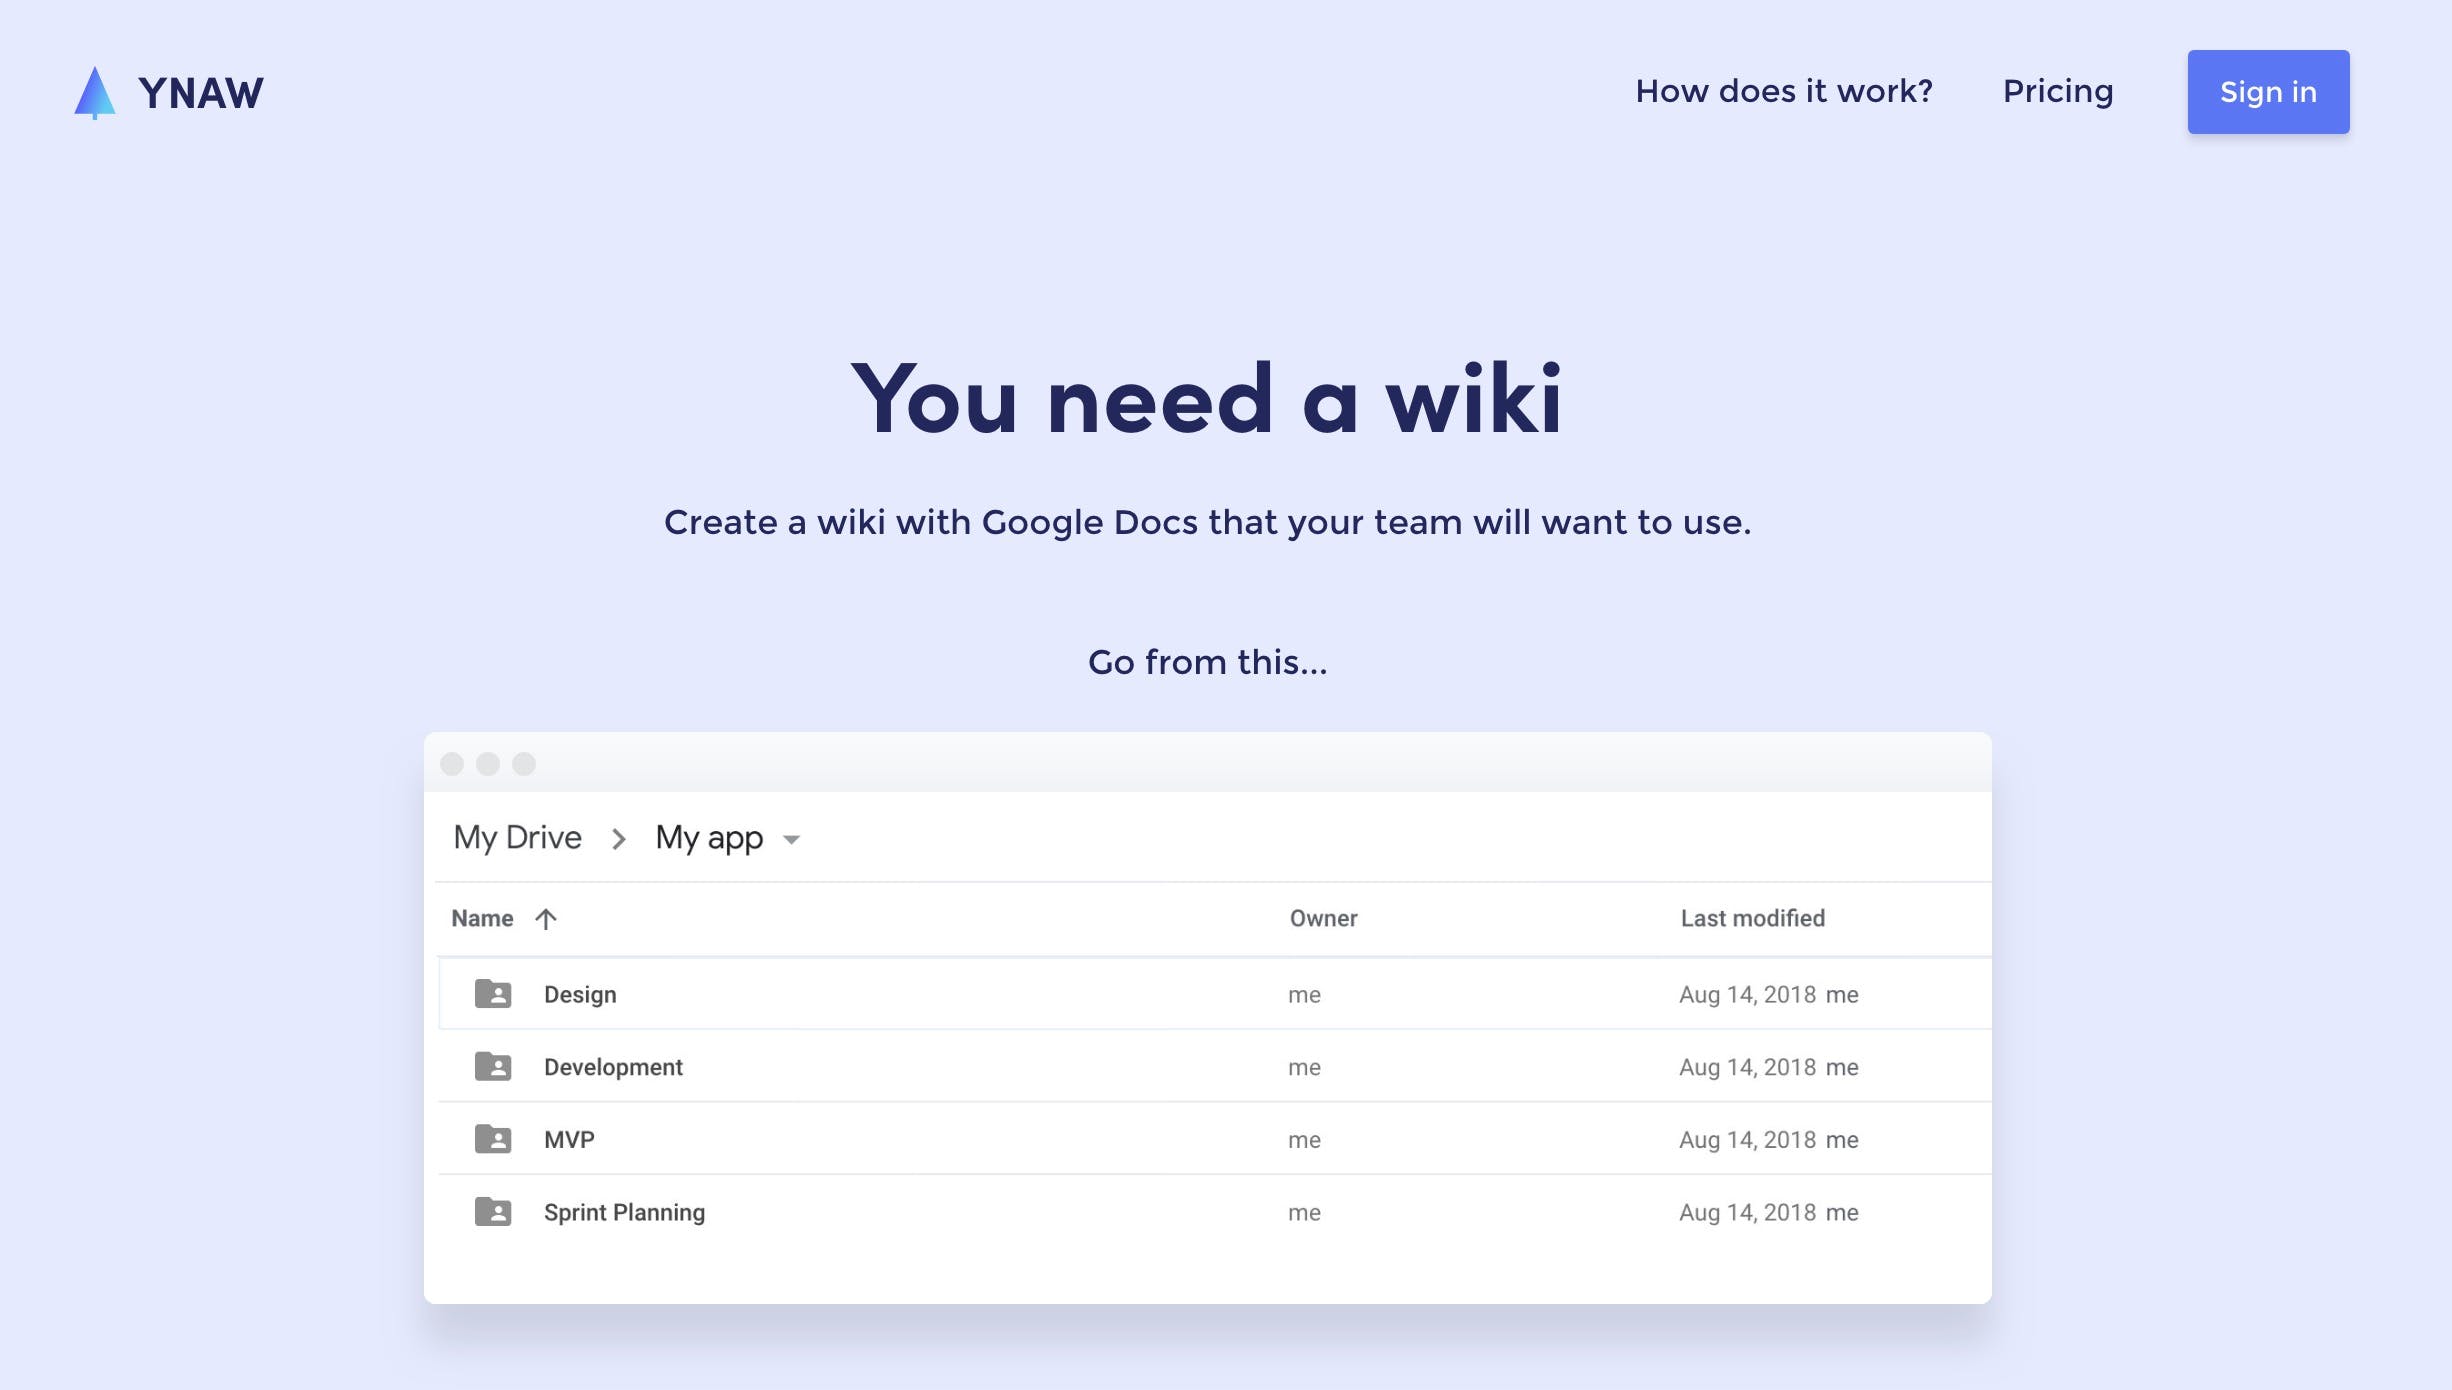 You Need A Wiki media 3